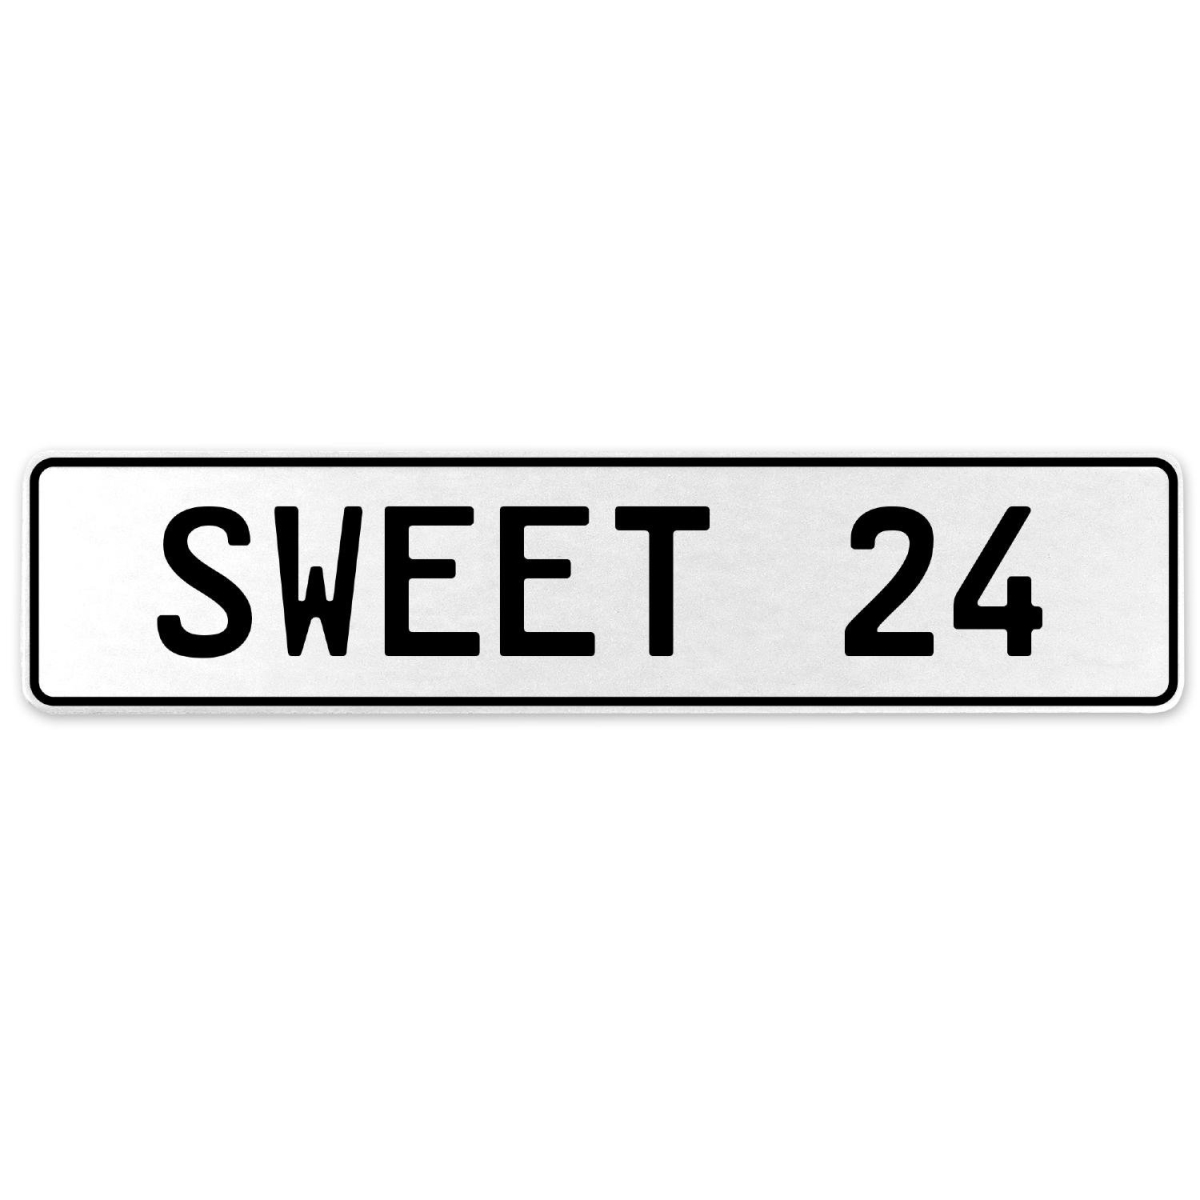 554126 Sweet 24 - White Aluminum Street Sign Mancave Euro Plate Name Door Sign Wall